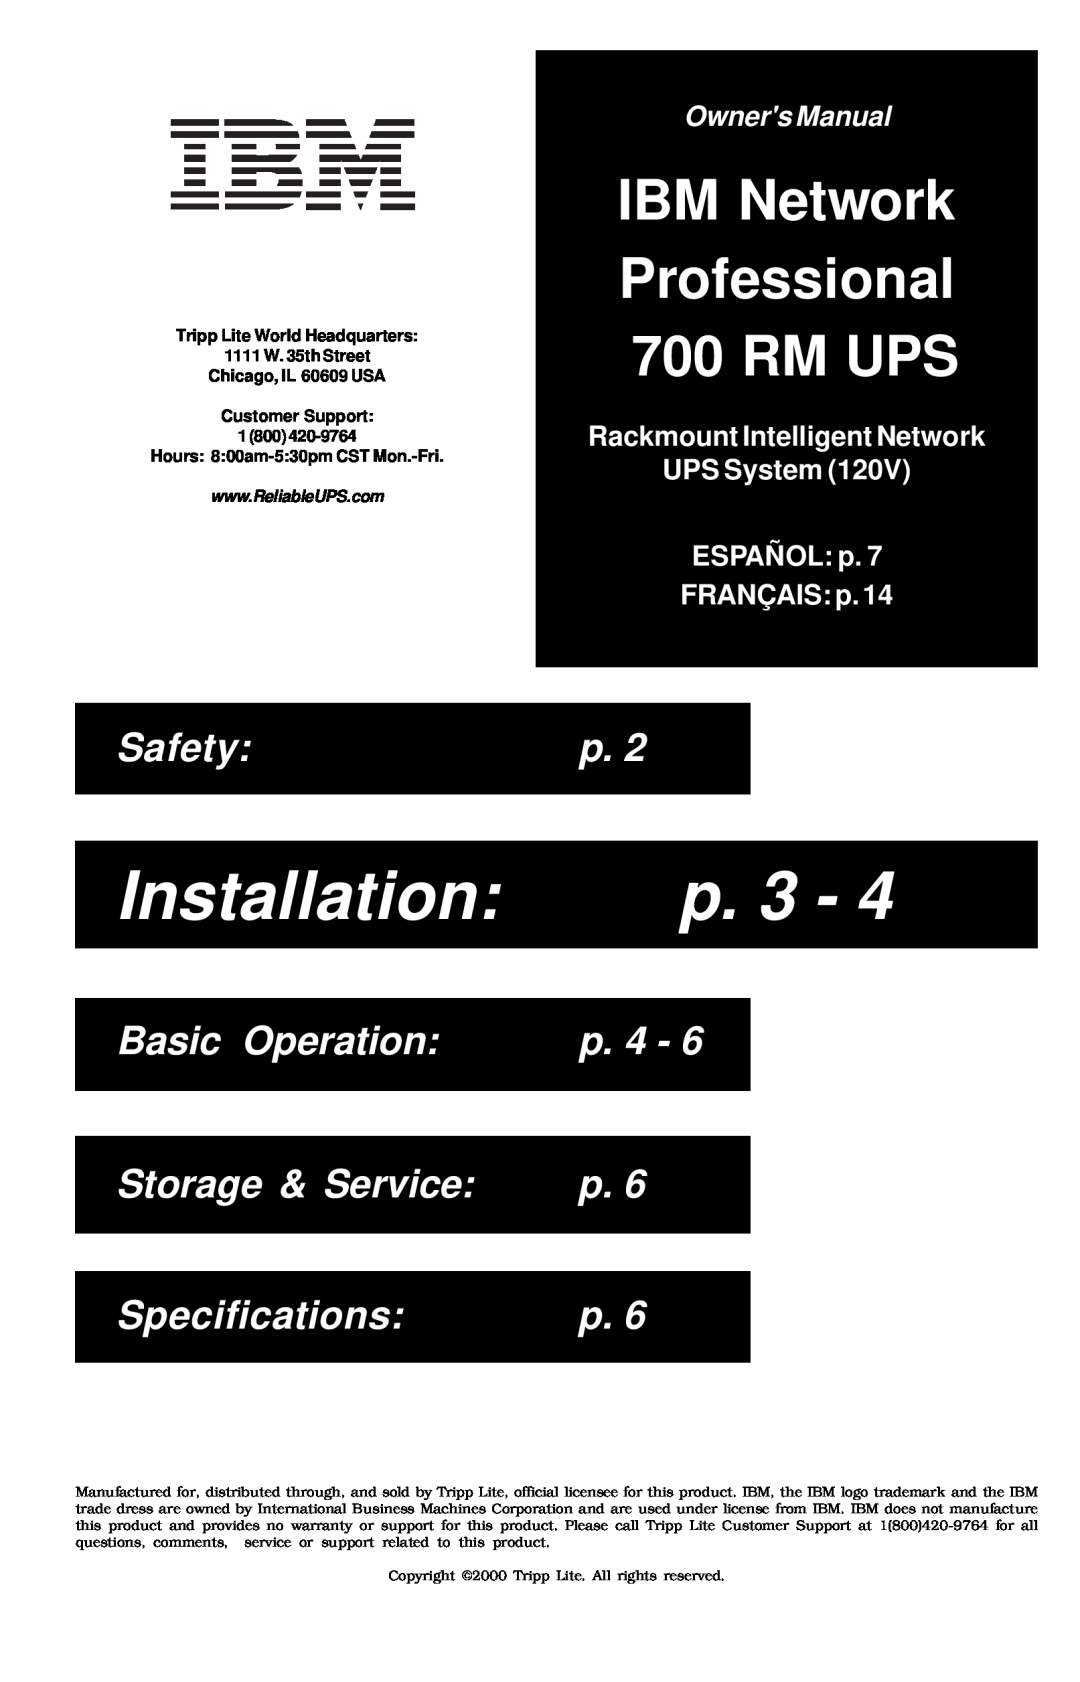 Tripp Lite owner manual Installation, p. 3, IBM Network Professional 700 RM UPS, Safety, Basic Operation, p. 4 